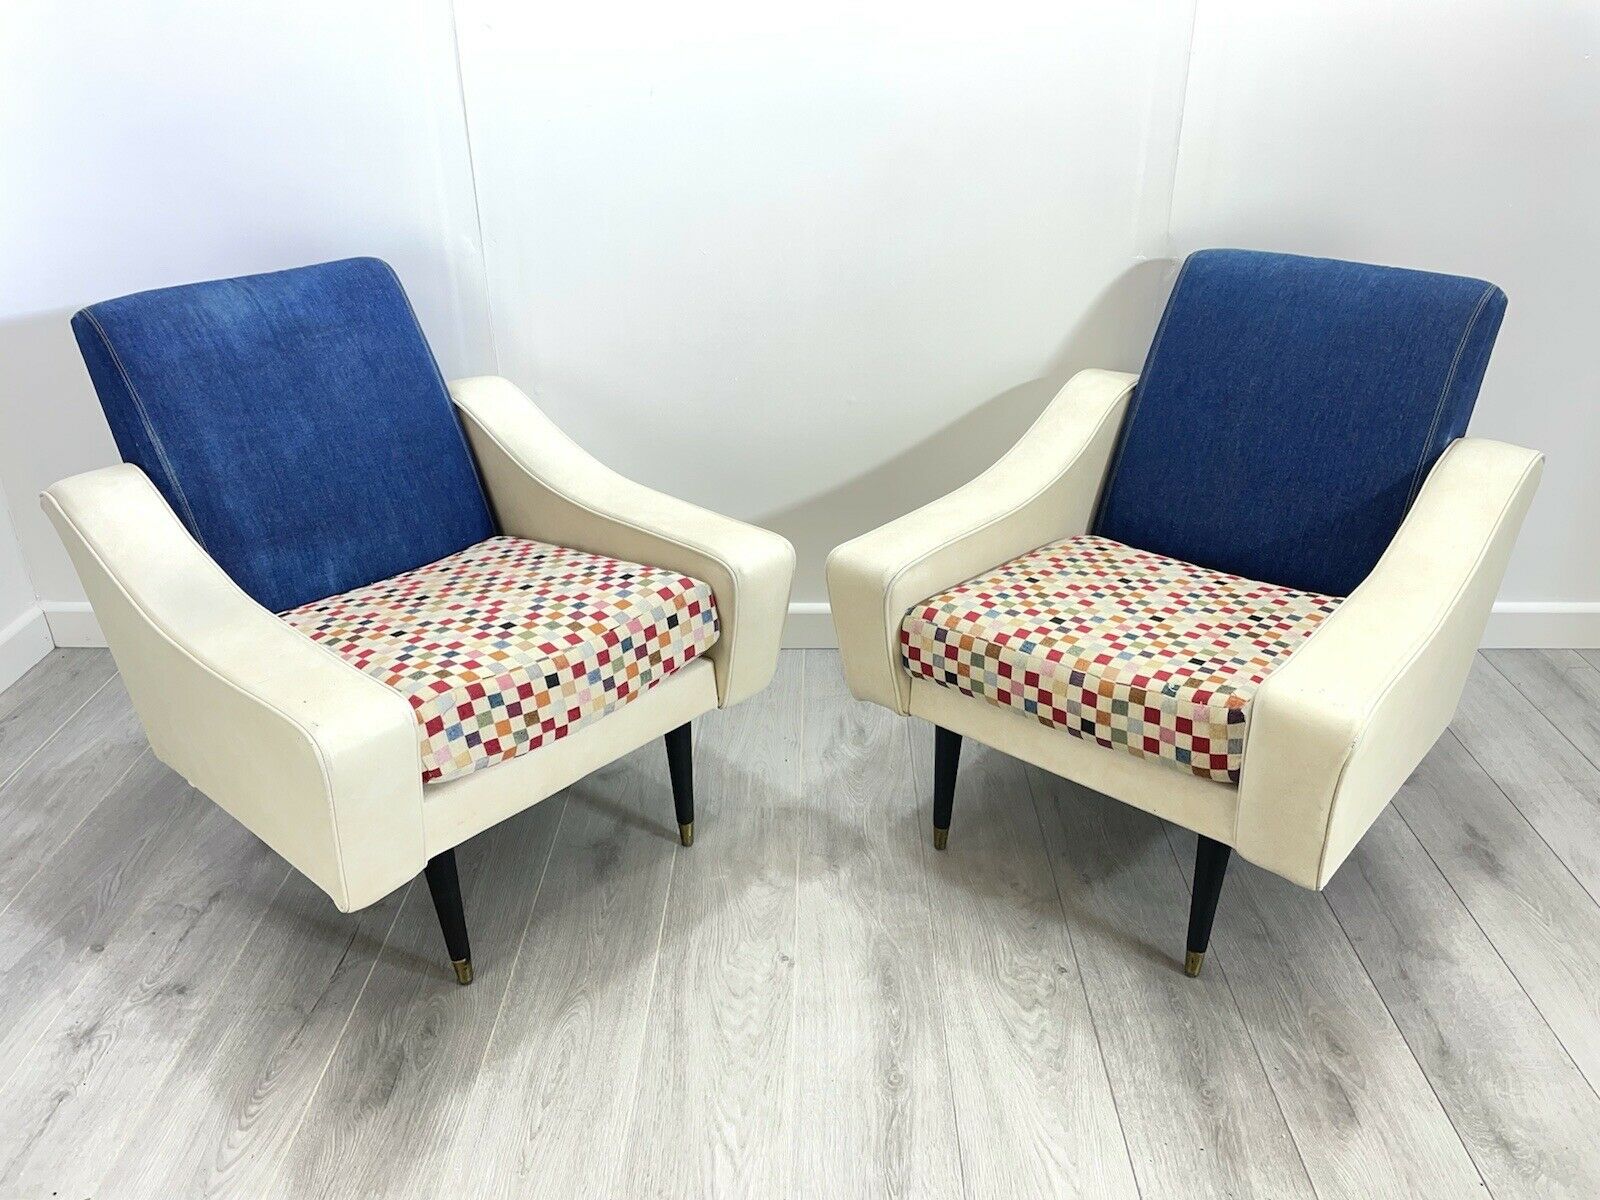 Pair of Retro, White Leather and Denim Lounge Chairs